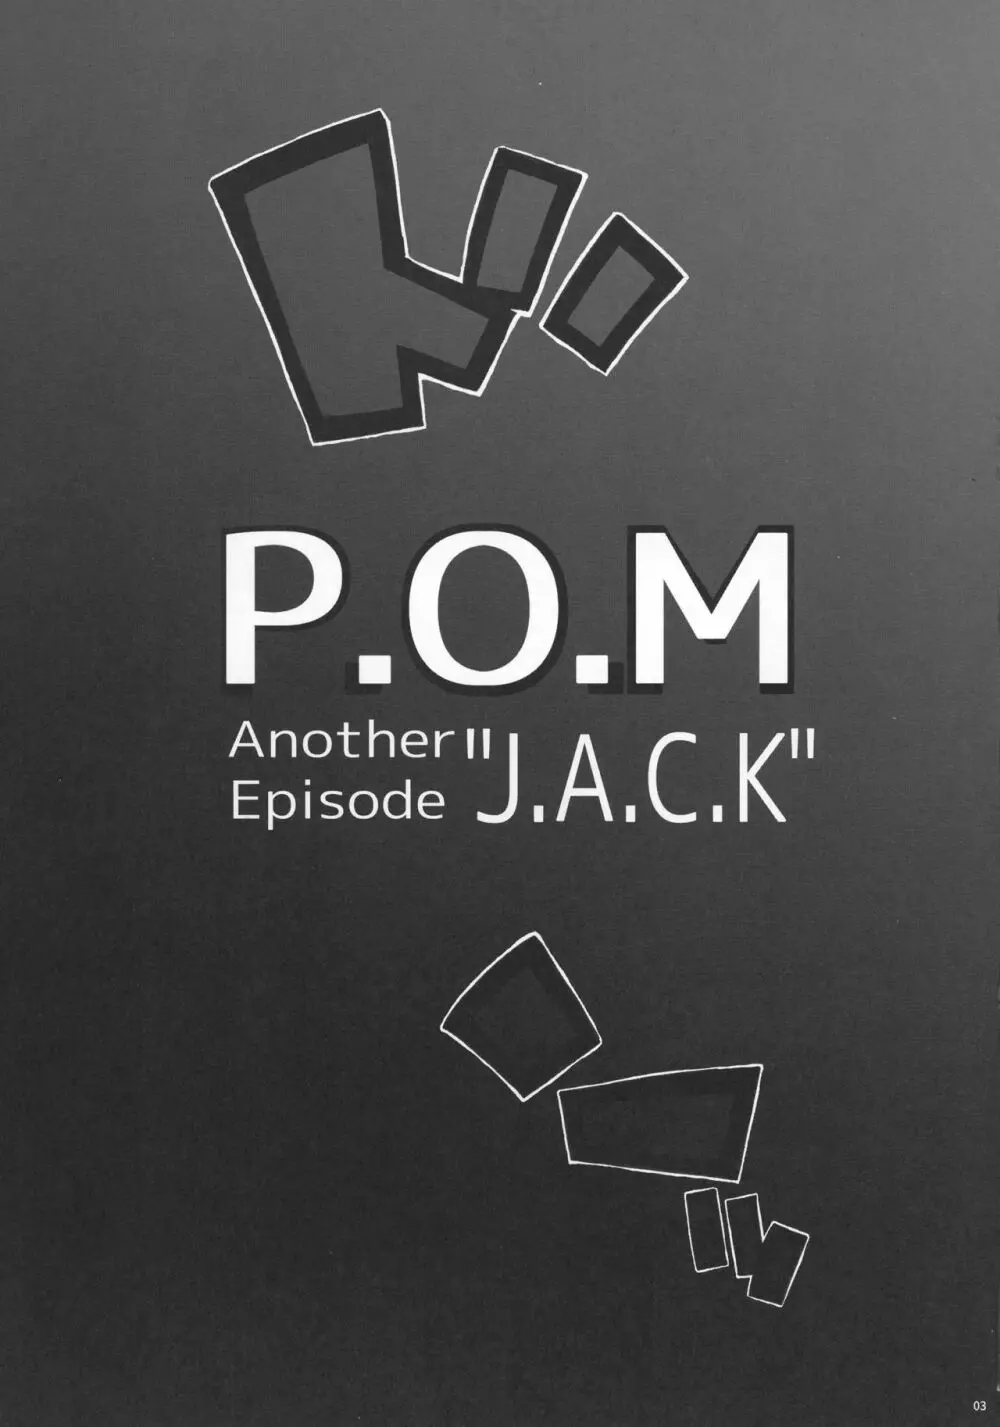 P.O.M Another Episode “J.A.C.K” 5ページ